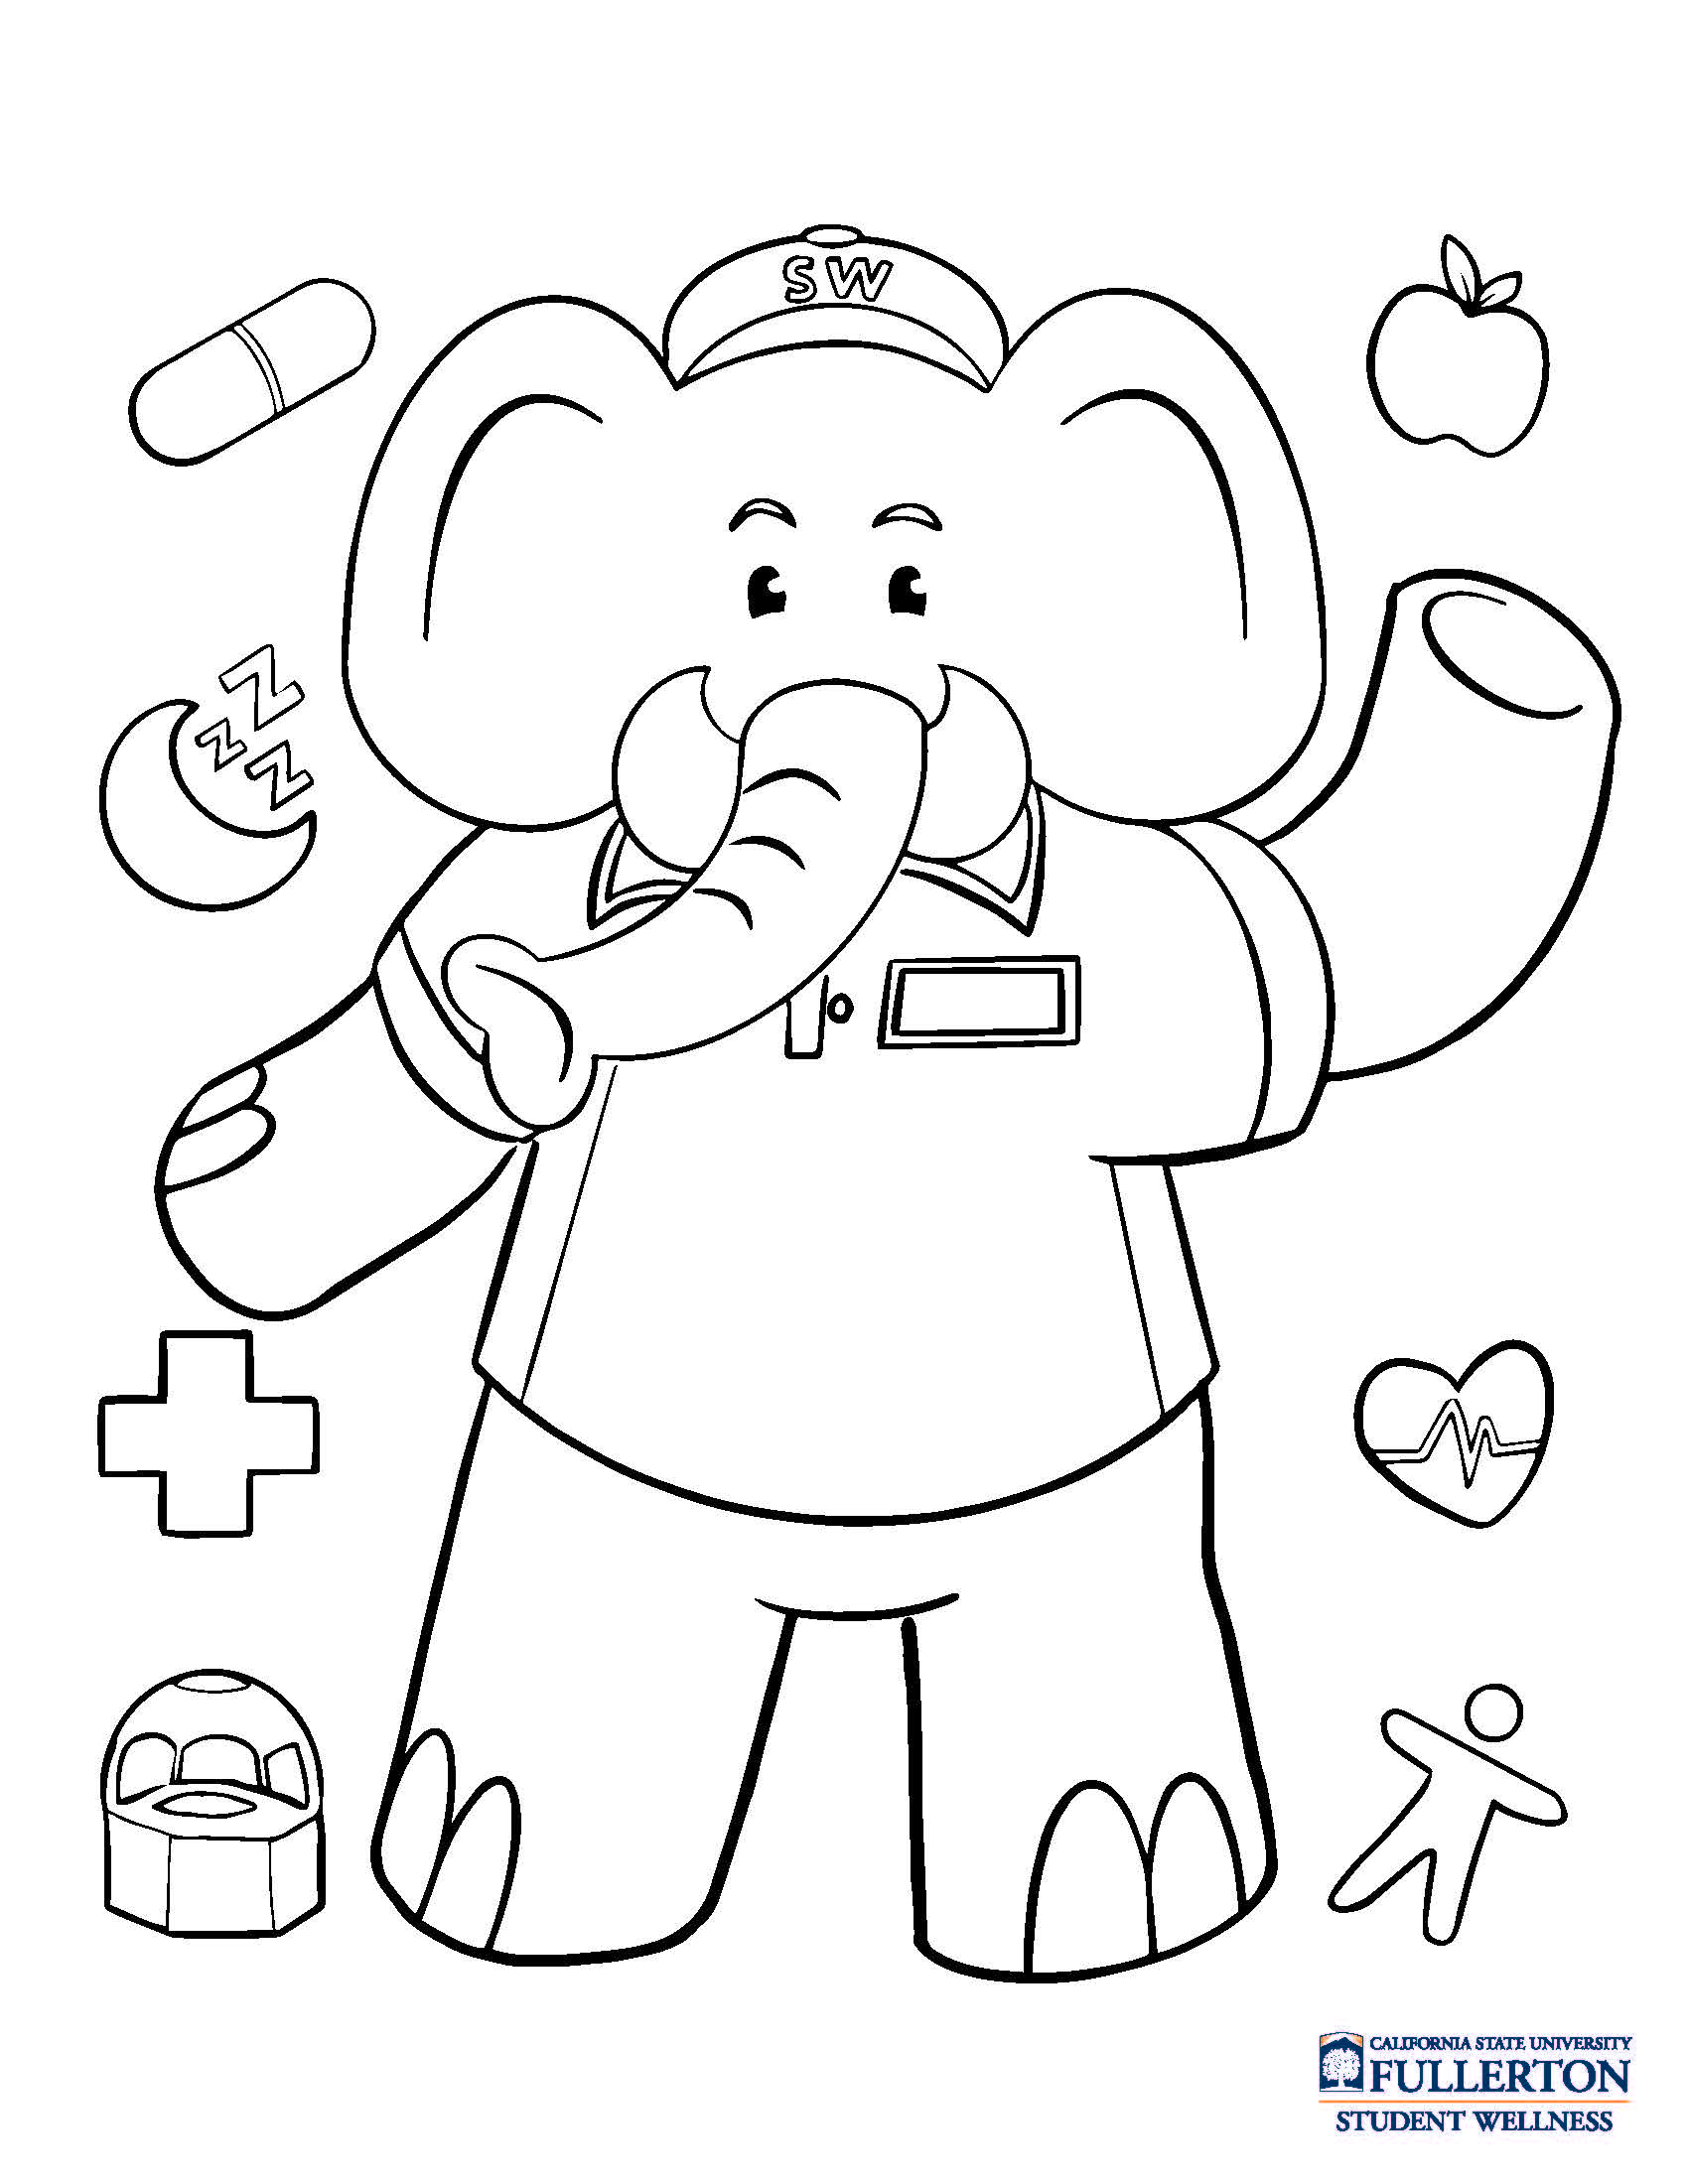 Coloring Pages 1 - elephant